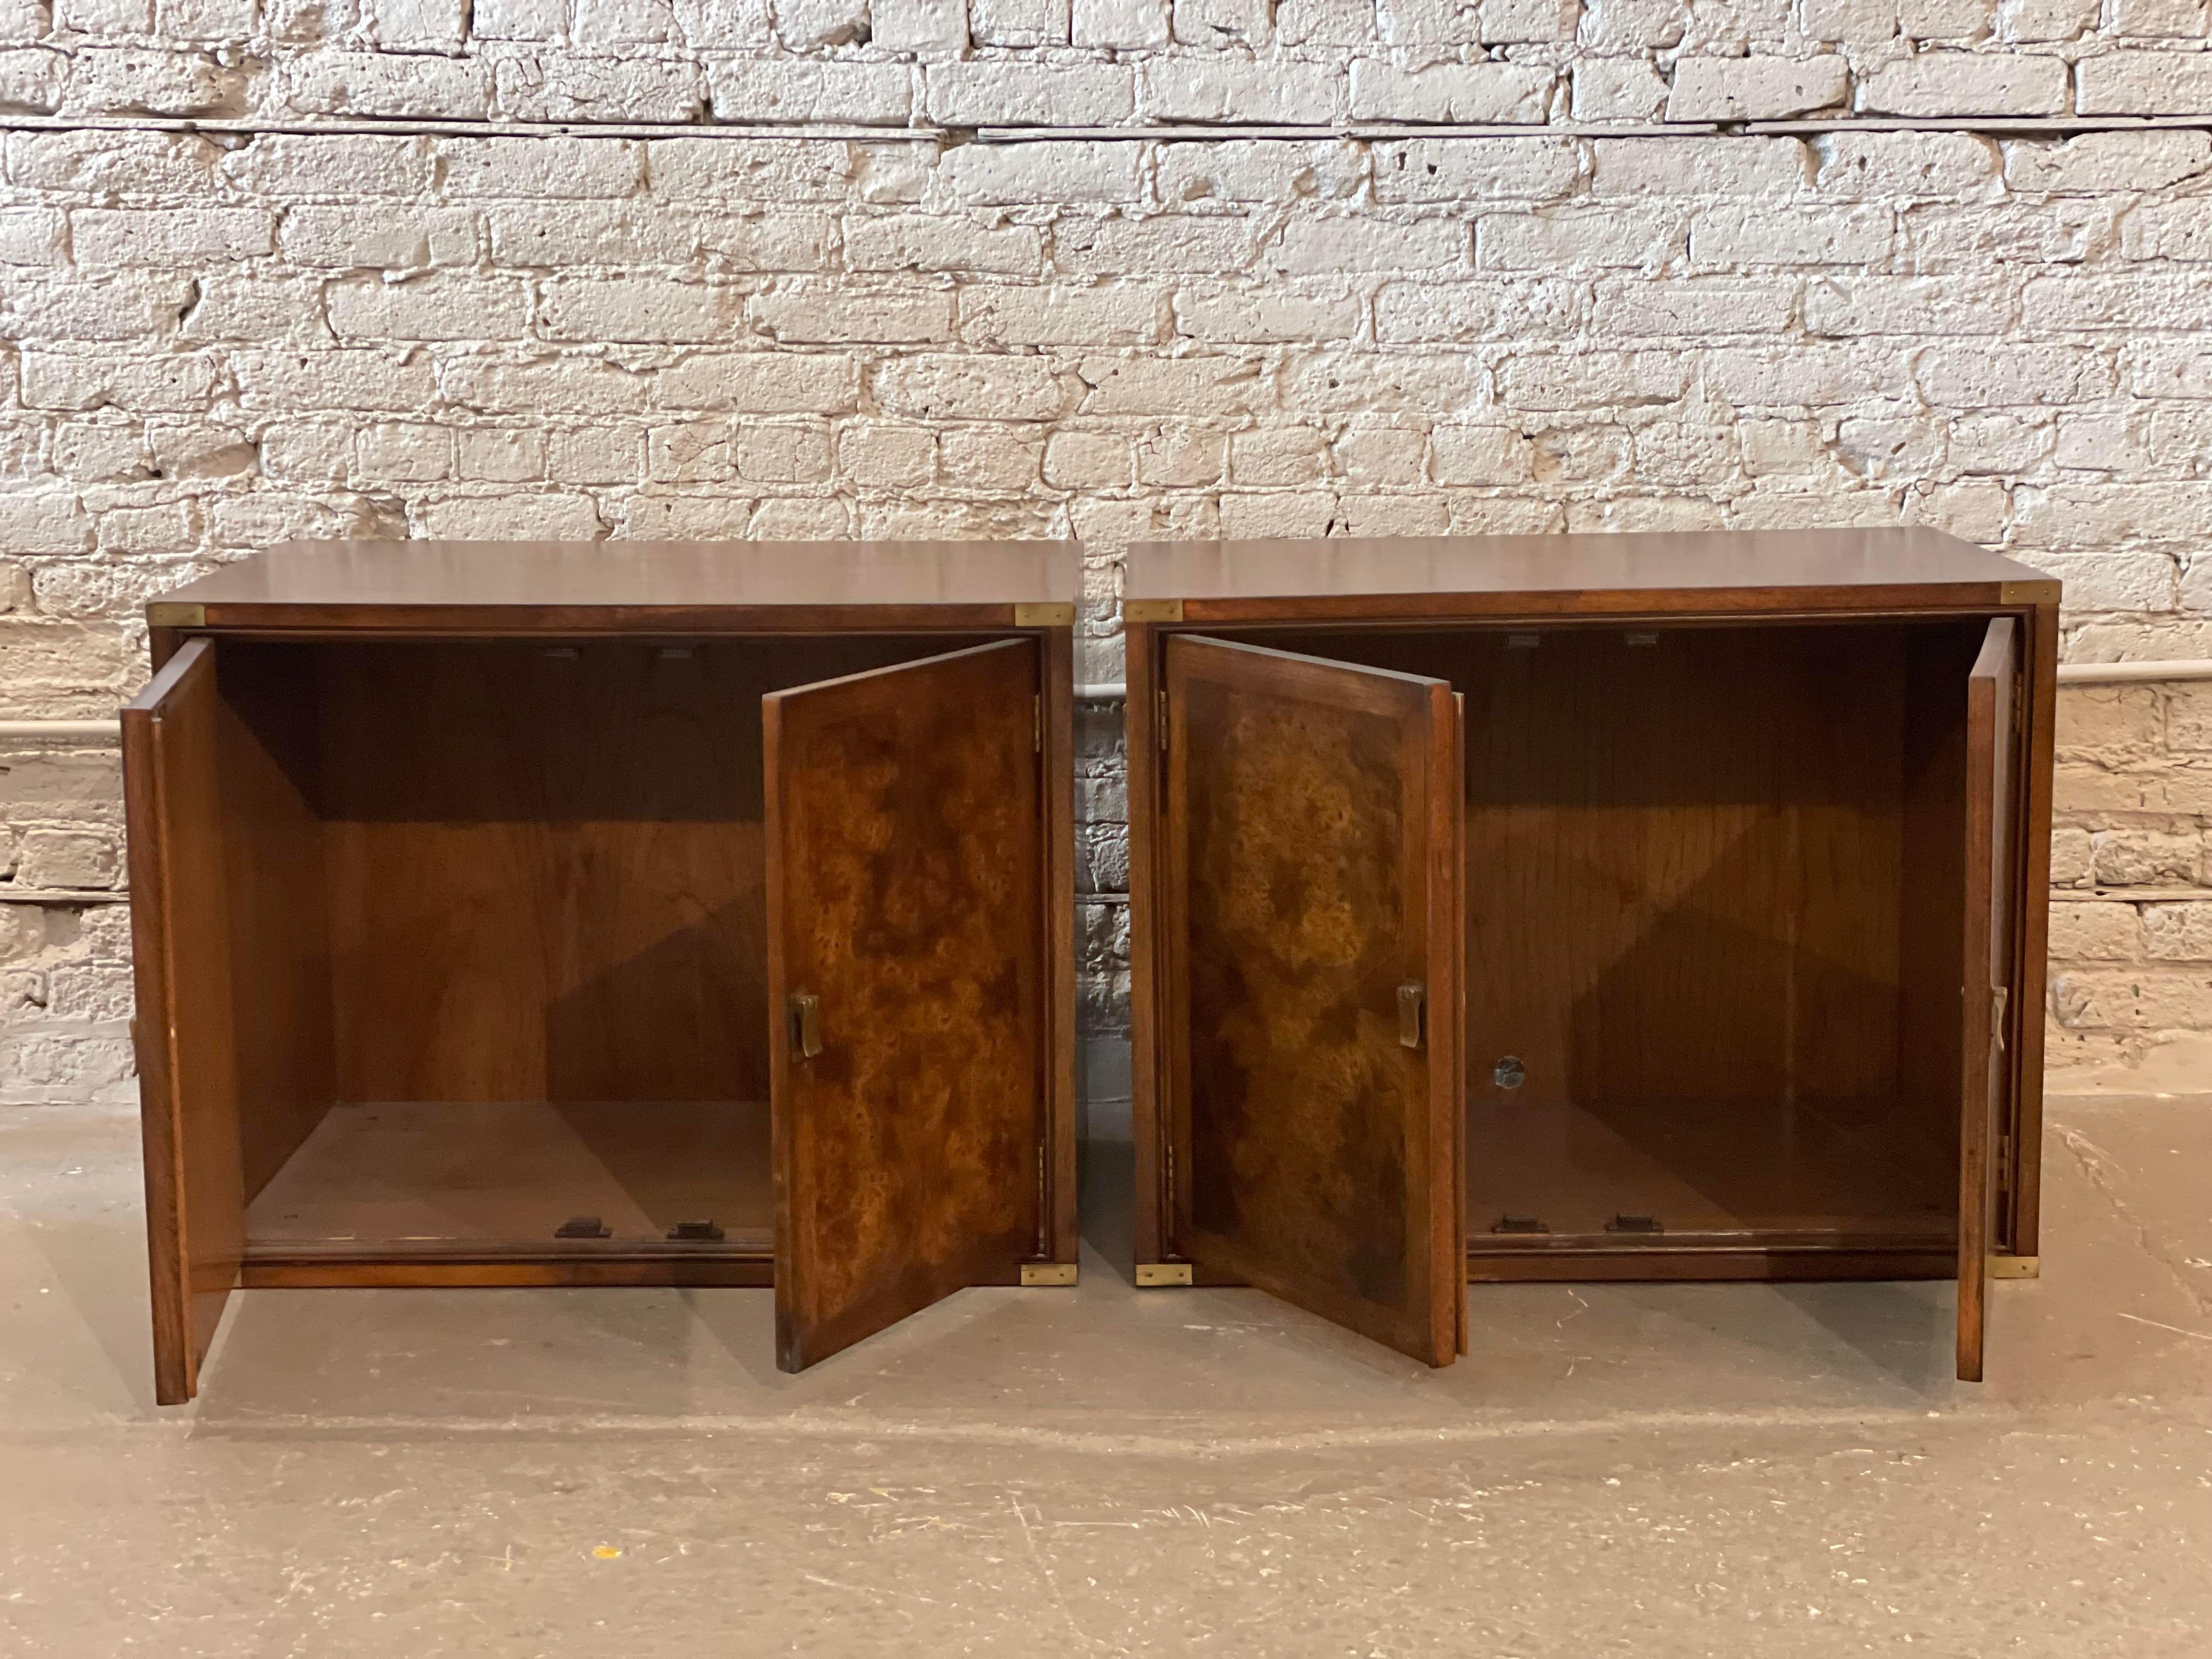 Beautiful Burled wood nightstands with brass pulls. These are a thick high quality veneer that have been refinished. They are ready to go! Please note - there are currently no internal shelves but can be added if needed.